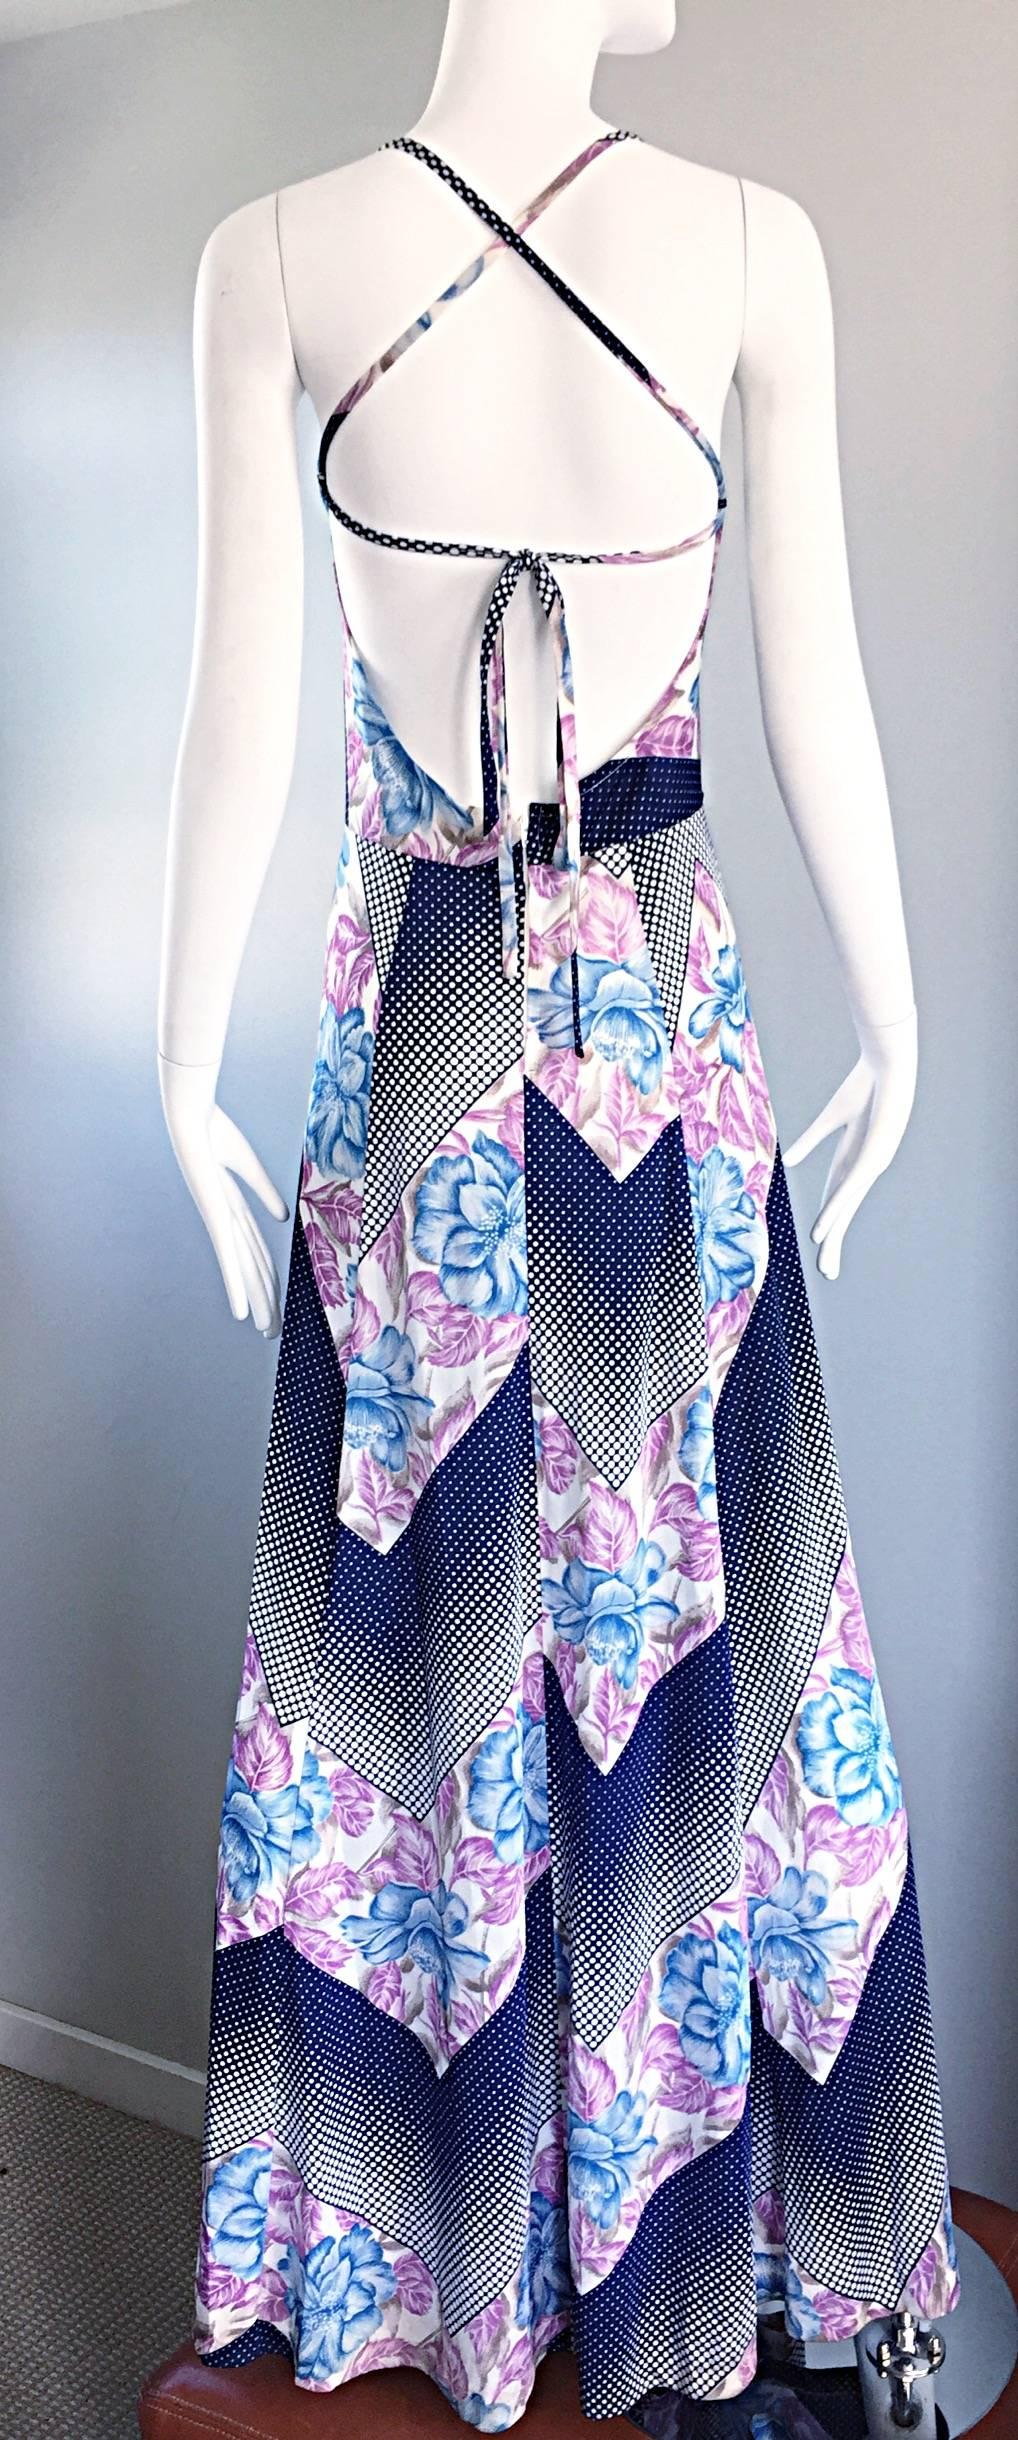 Amazing vintage ERIC LAAGE of Paris 1970s maxi dress! Features an optical illusion op-art print, with navy and white polka dots and 3-D blue and purple flowers throughout. Halter style that wraps around the neck, and cages on the back. Amazing full